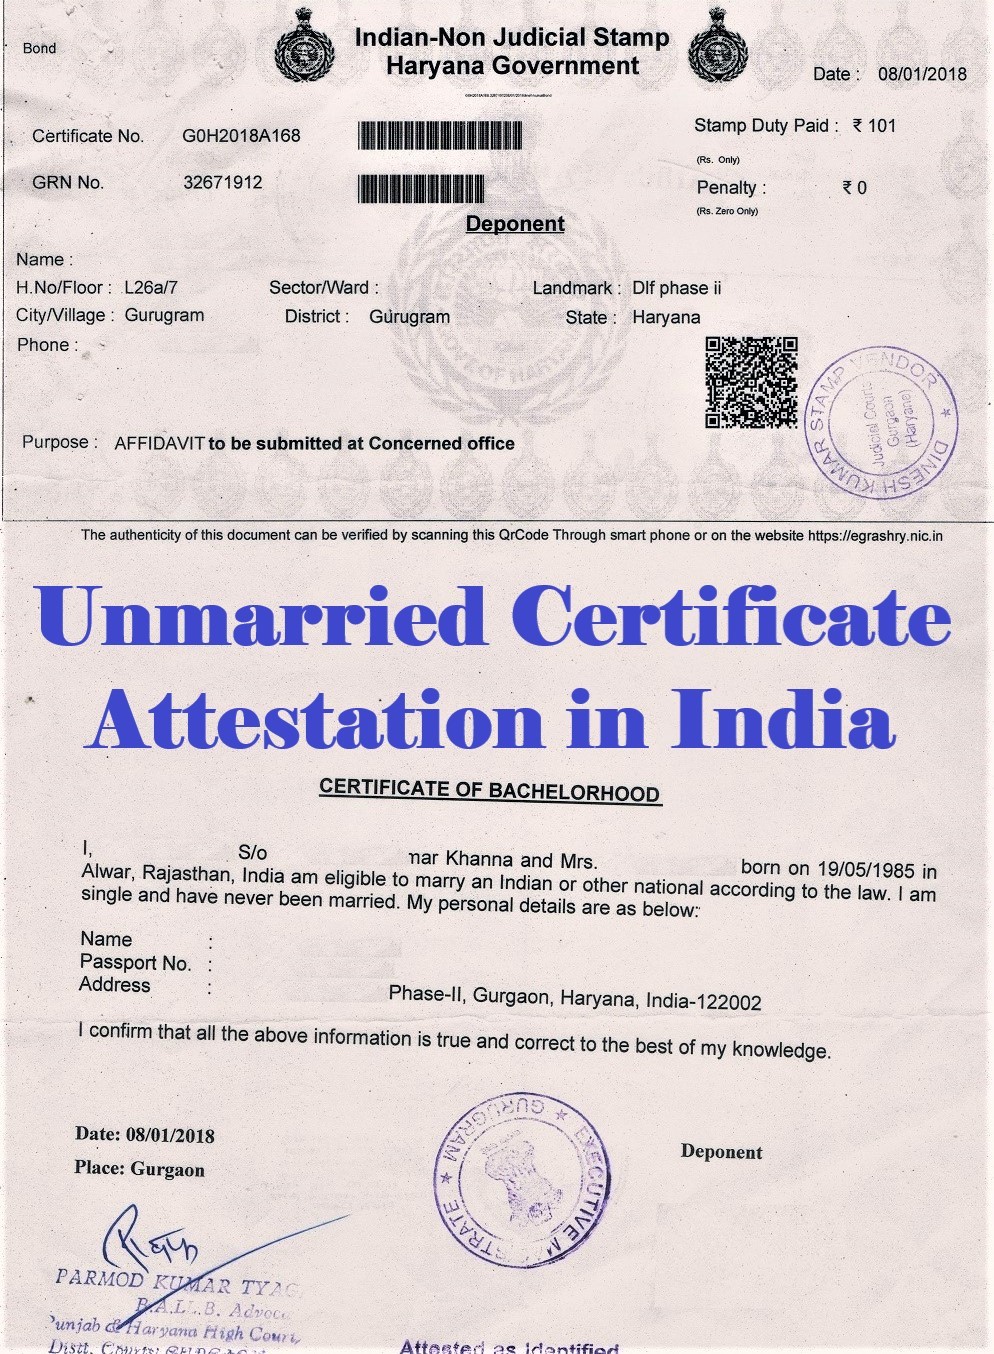 Unmarried Certificate Attestation from Trinidad and Tobago Embassy